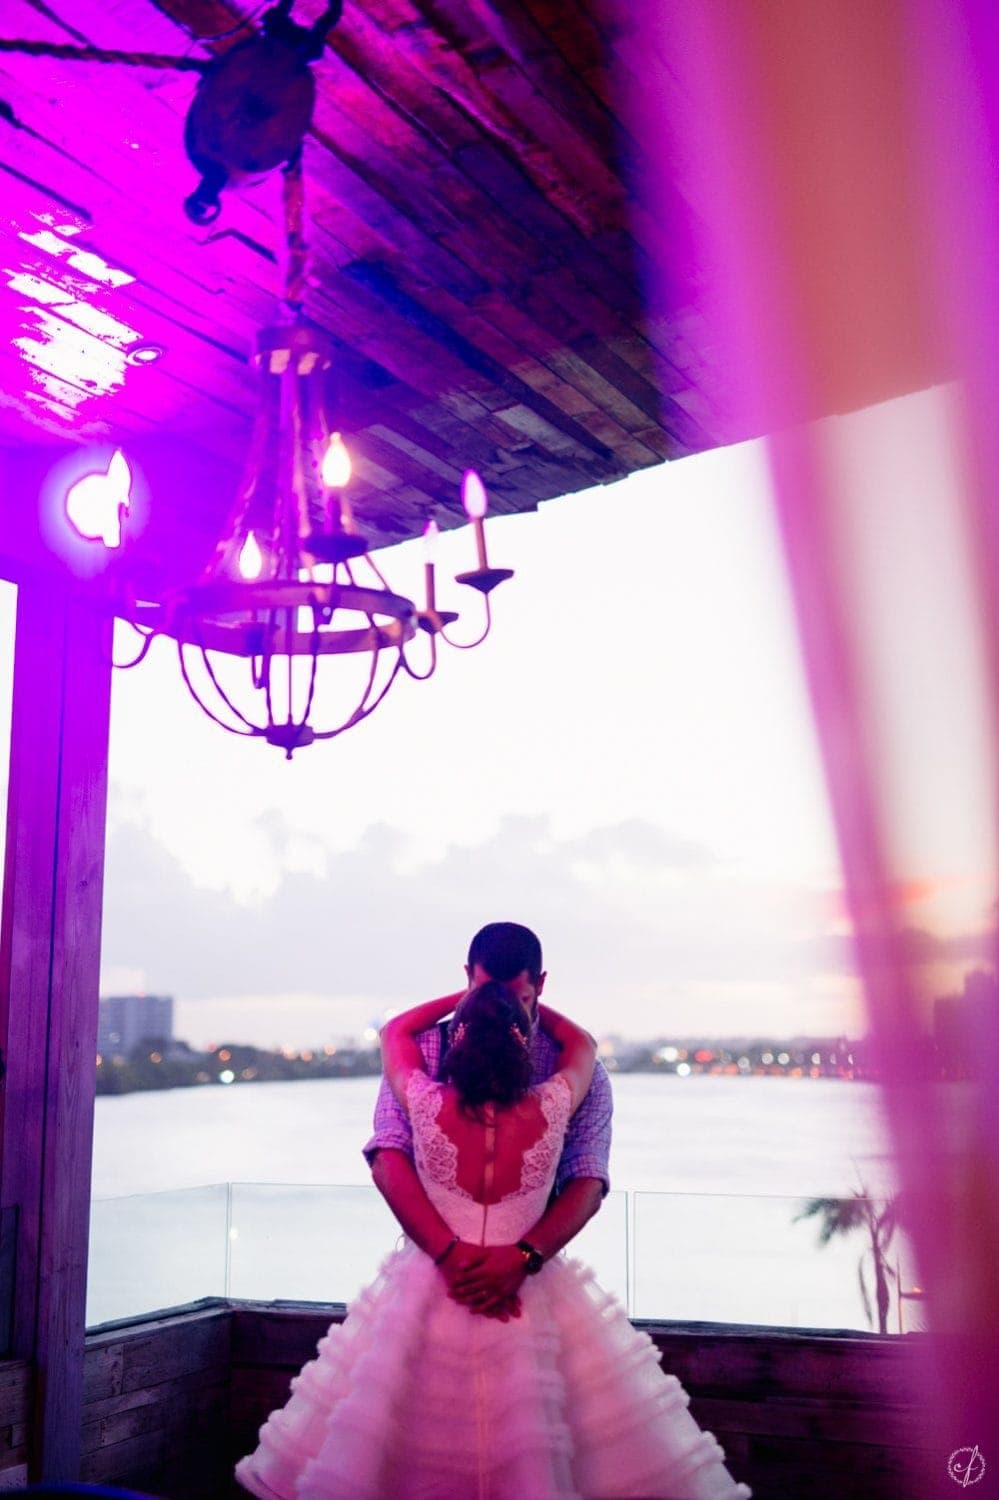 Intimate destination wedding photography at the rooftop of the Olive Boutique Hotel at Condado, Puerto Rico